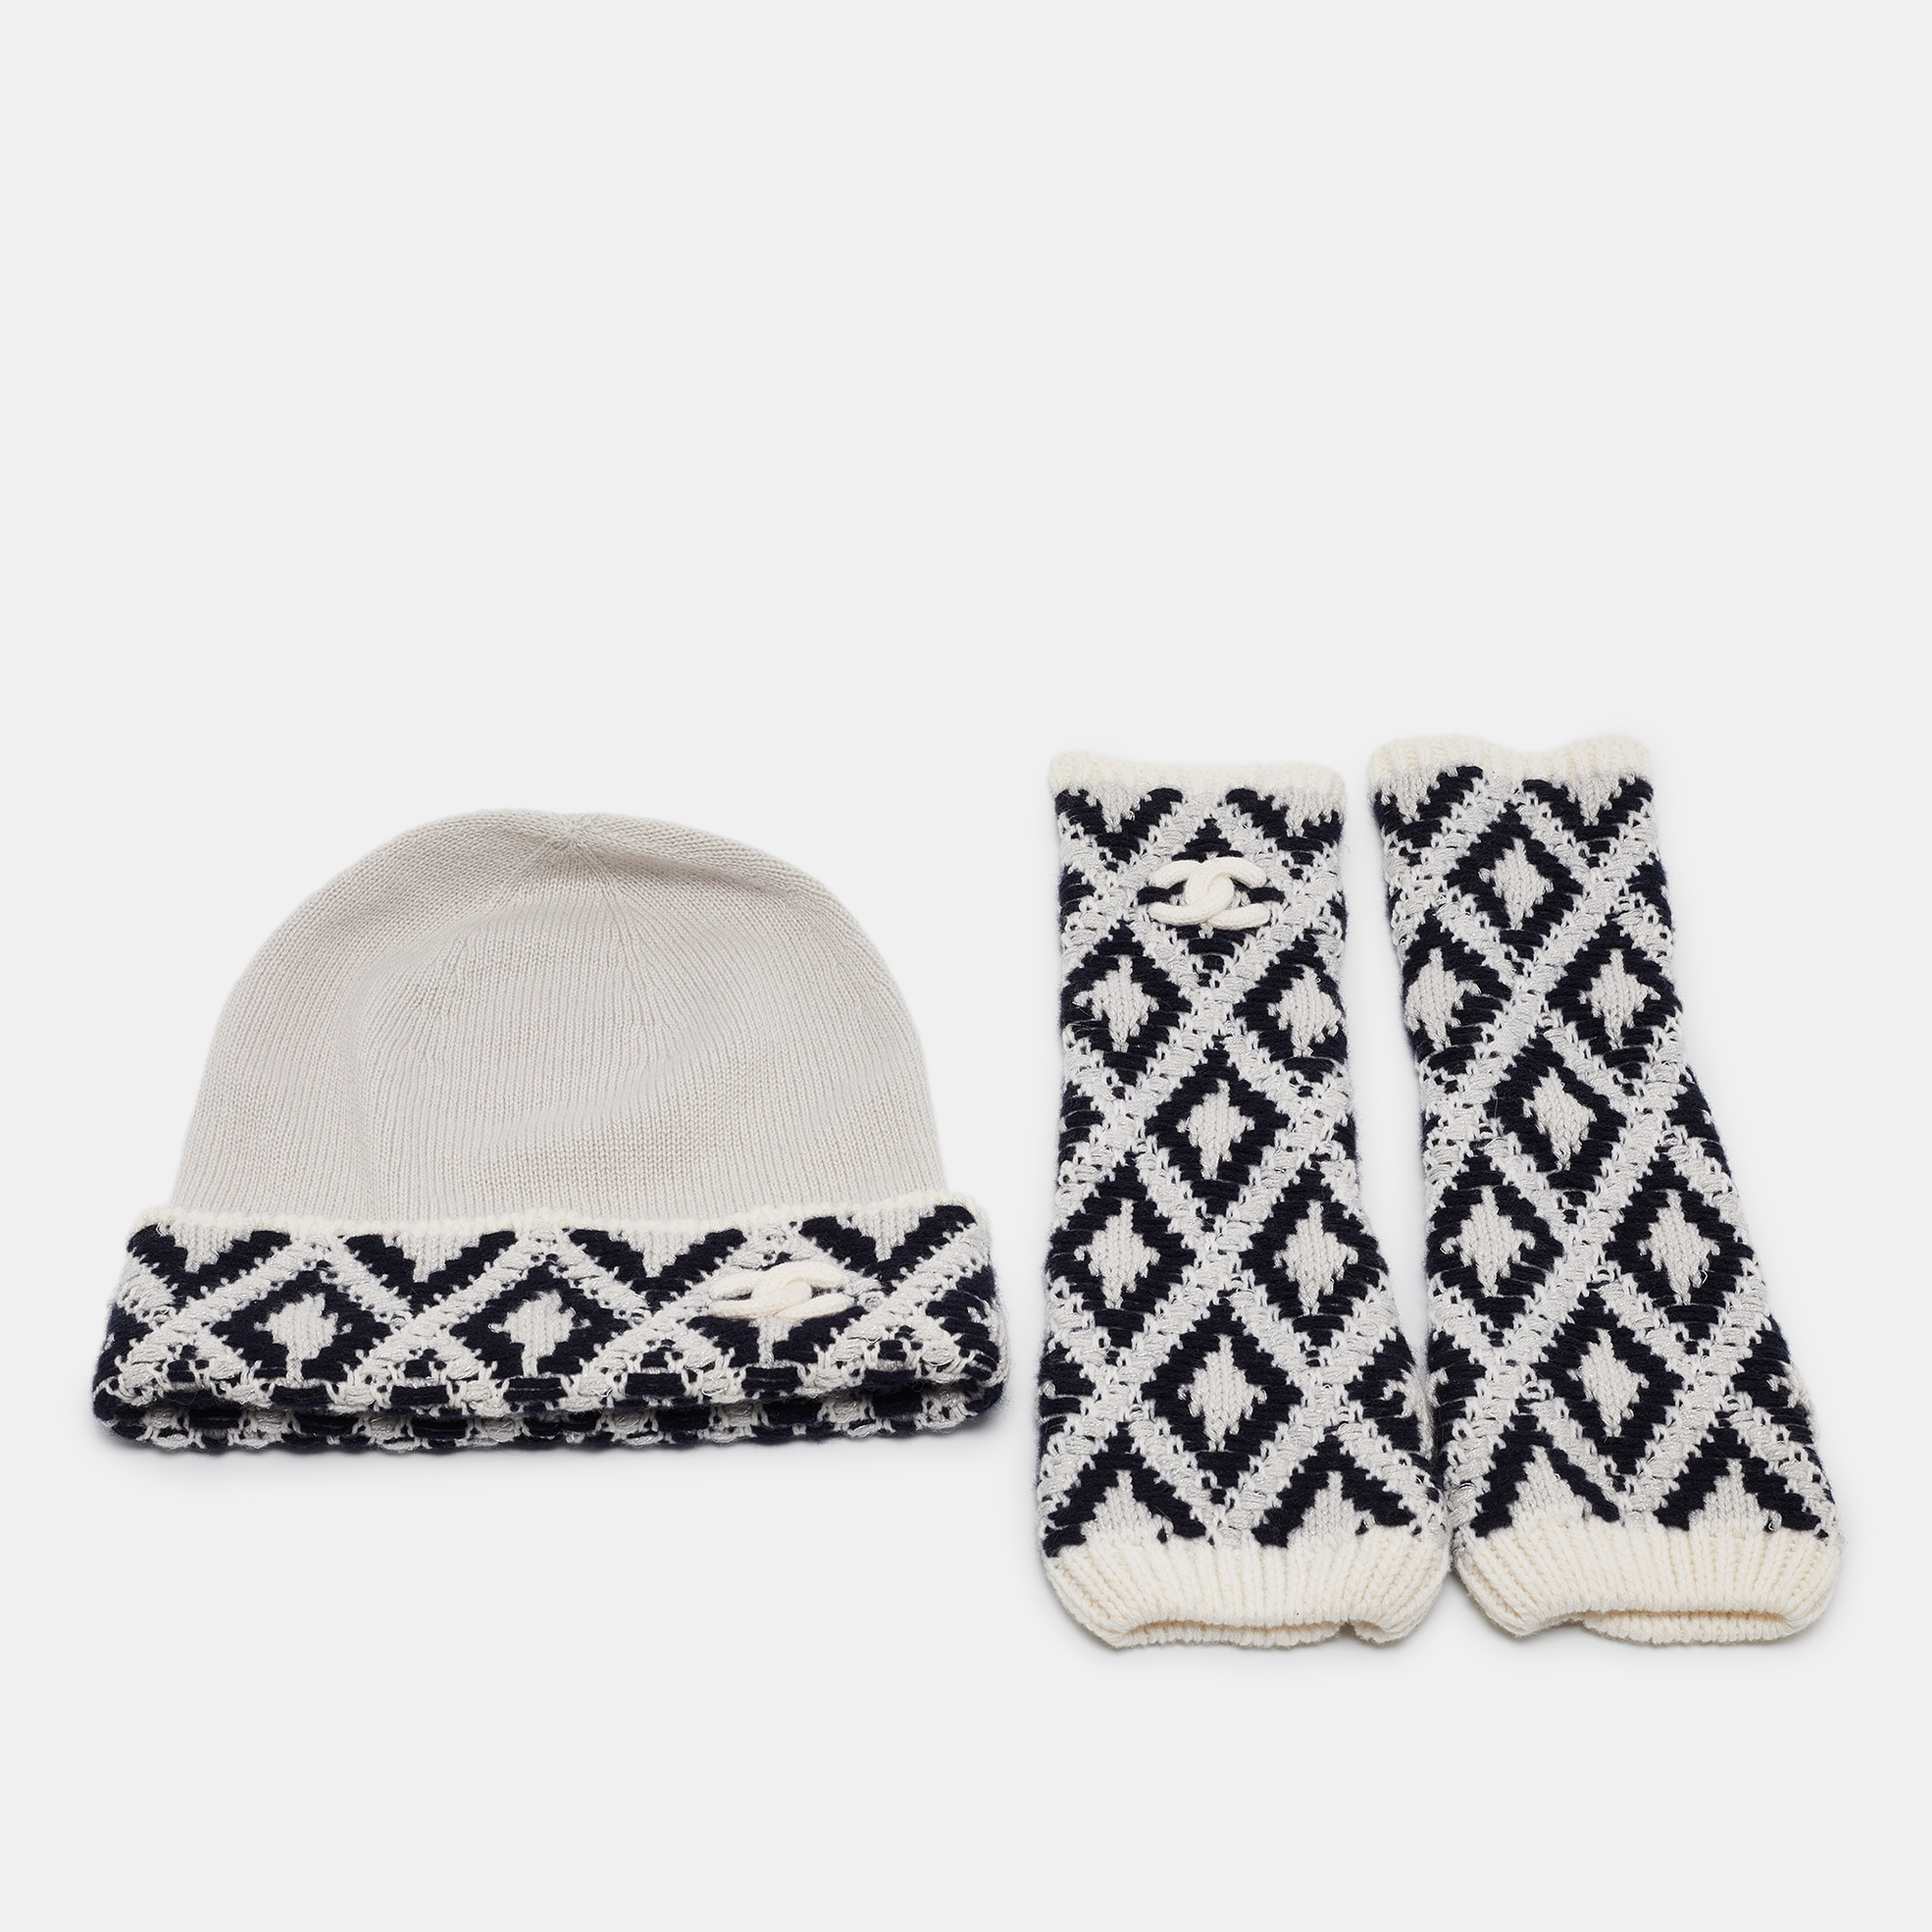 

Chanel Blue/White Patterned Cashmere Knit Beanie and Gloves Set